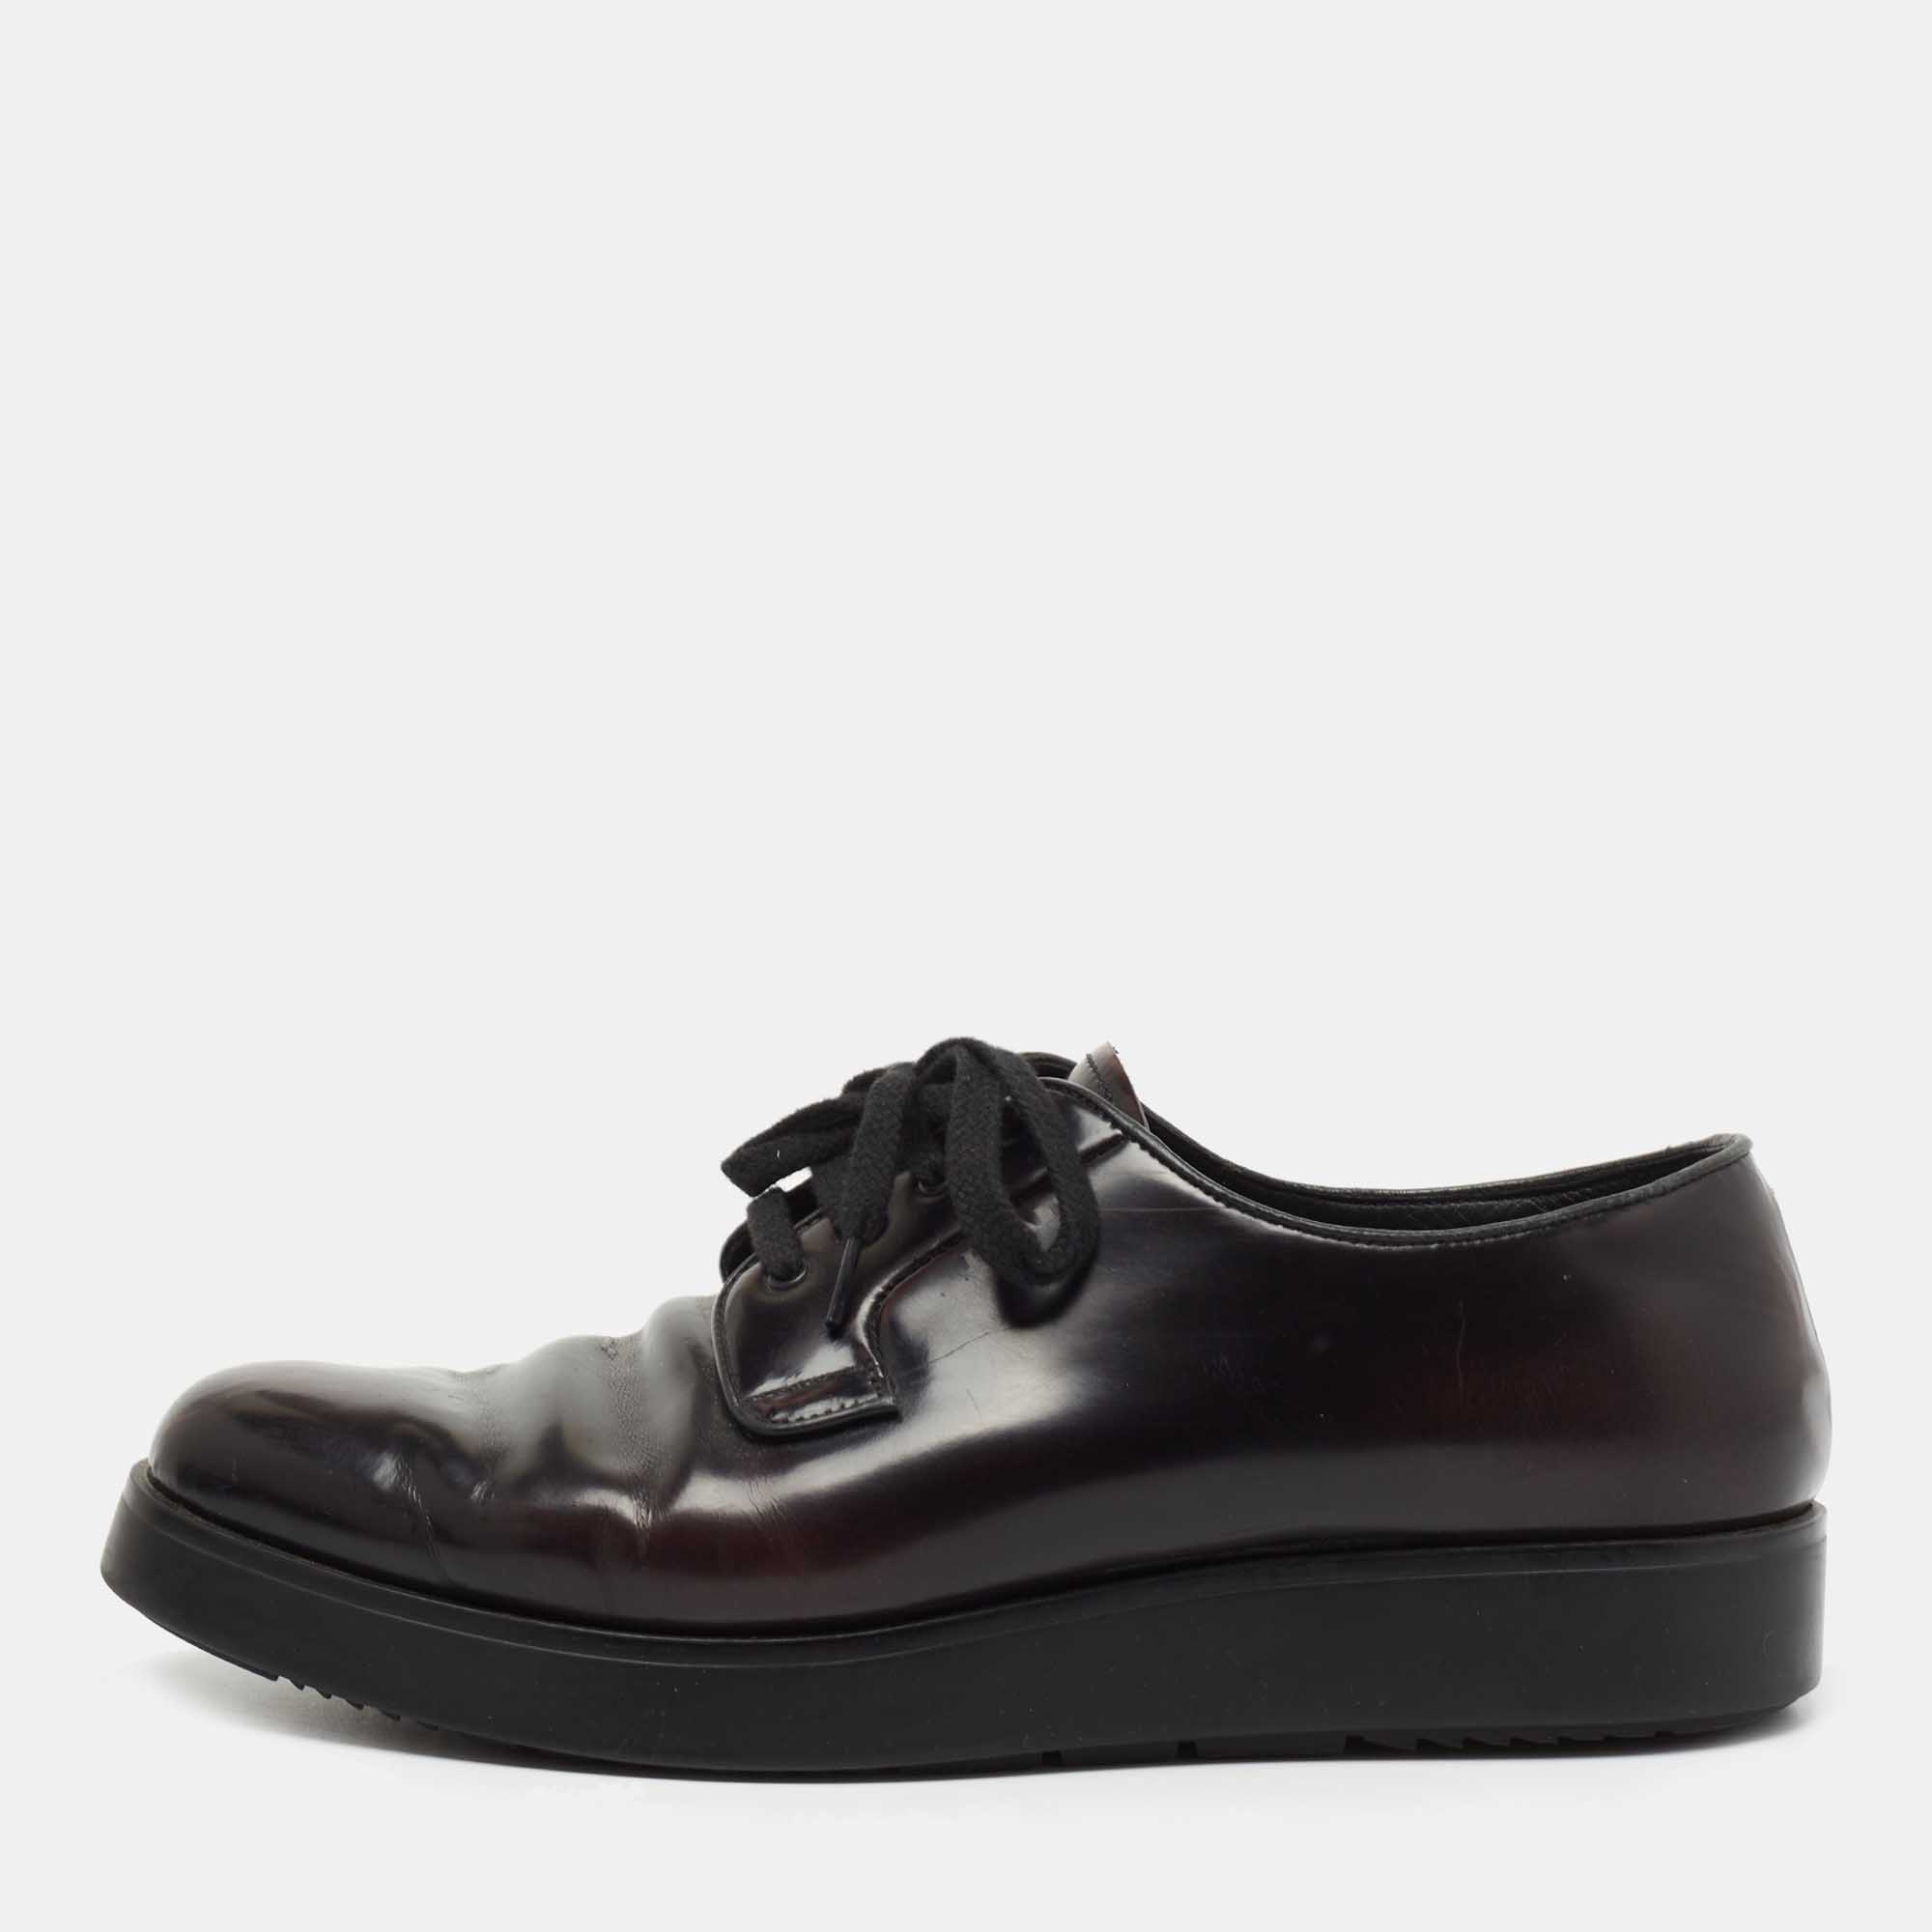 Prada Two Tone Leather Lace Up Oxford Size 41.5 